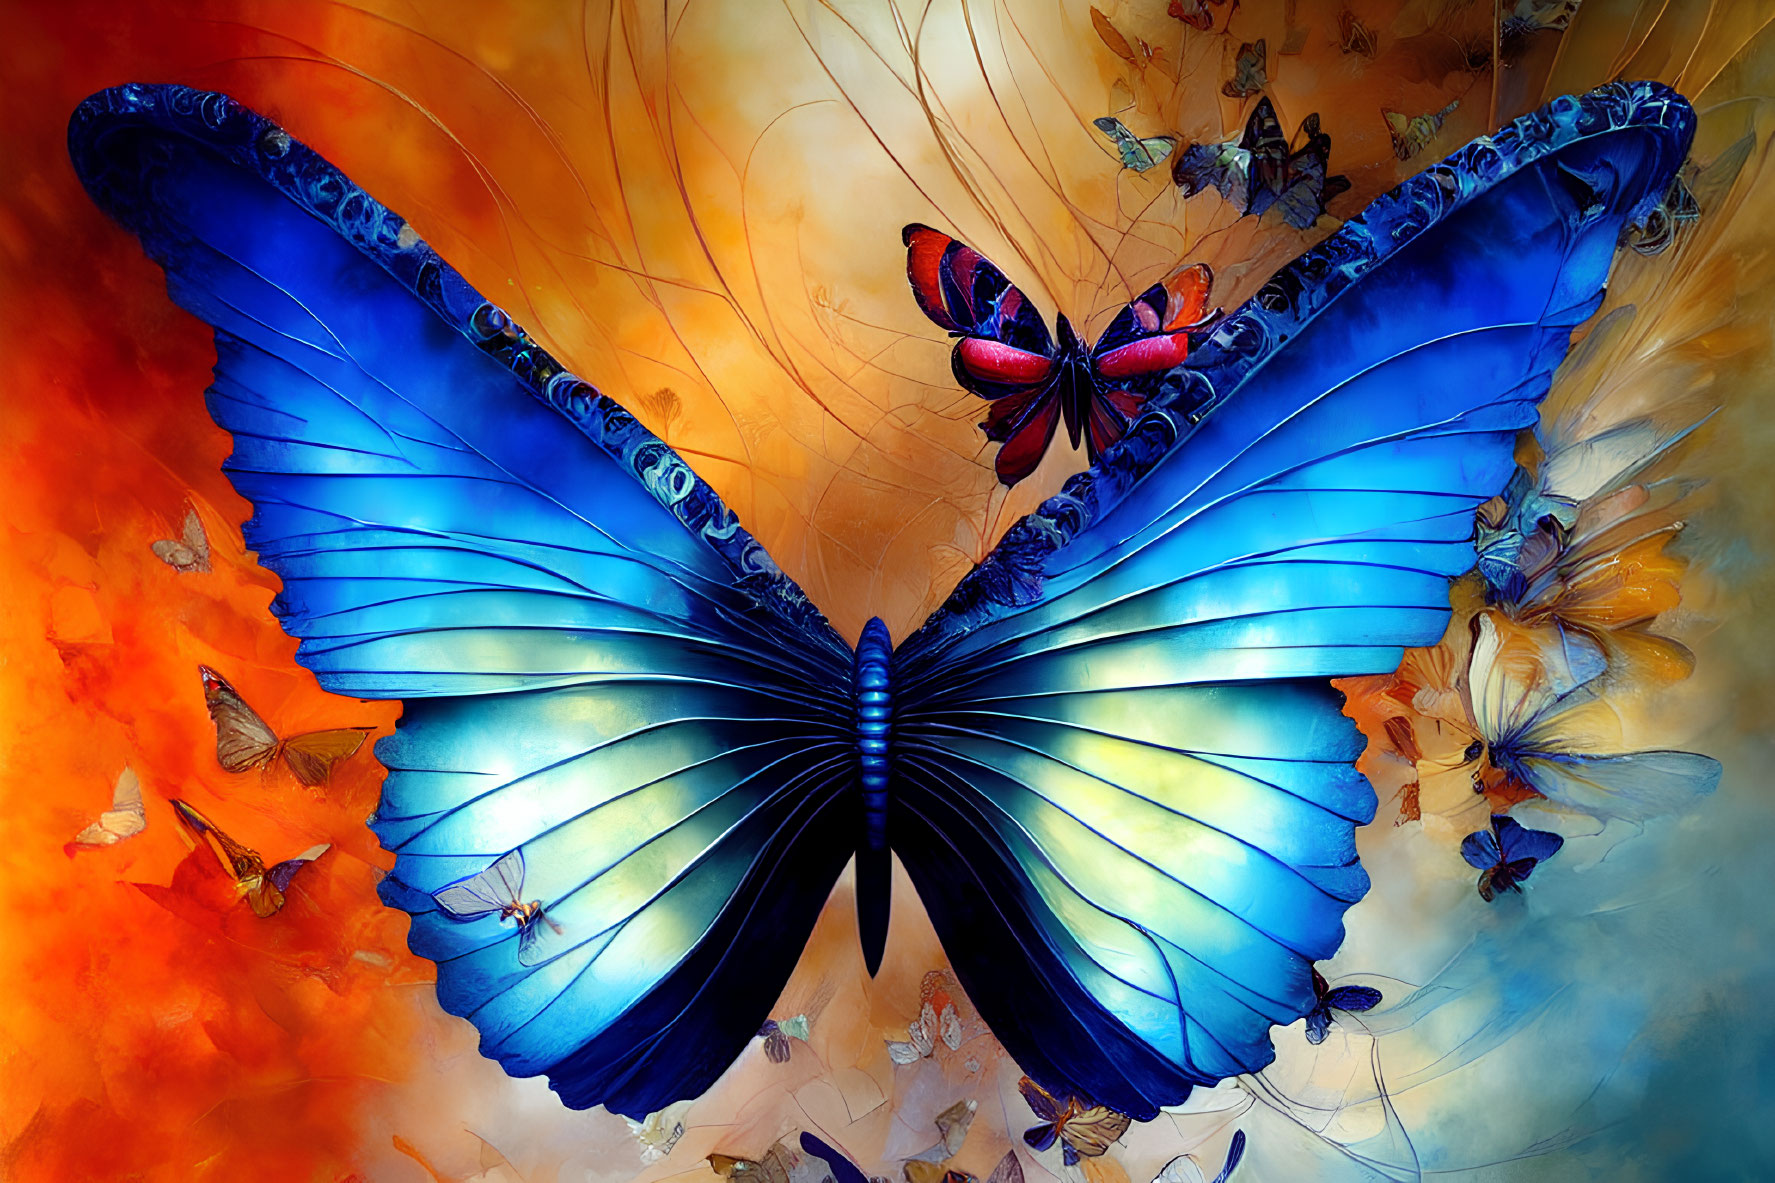 Colorful Blue Butterfly Surrounded by Smaller Ones on Fiery Background